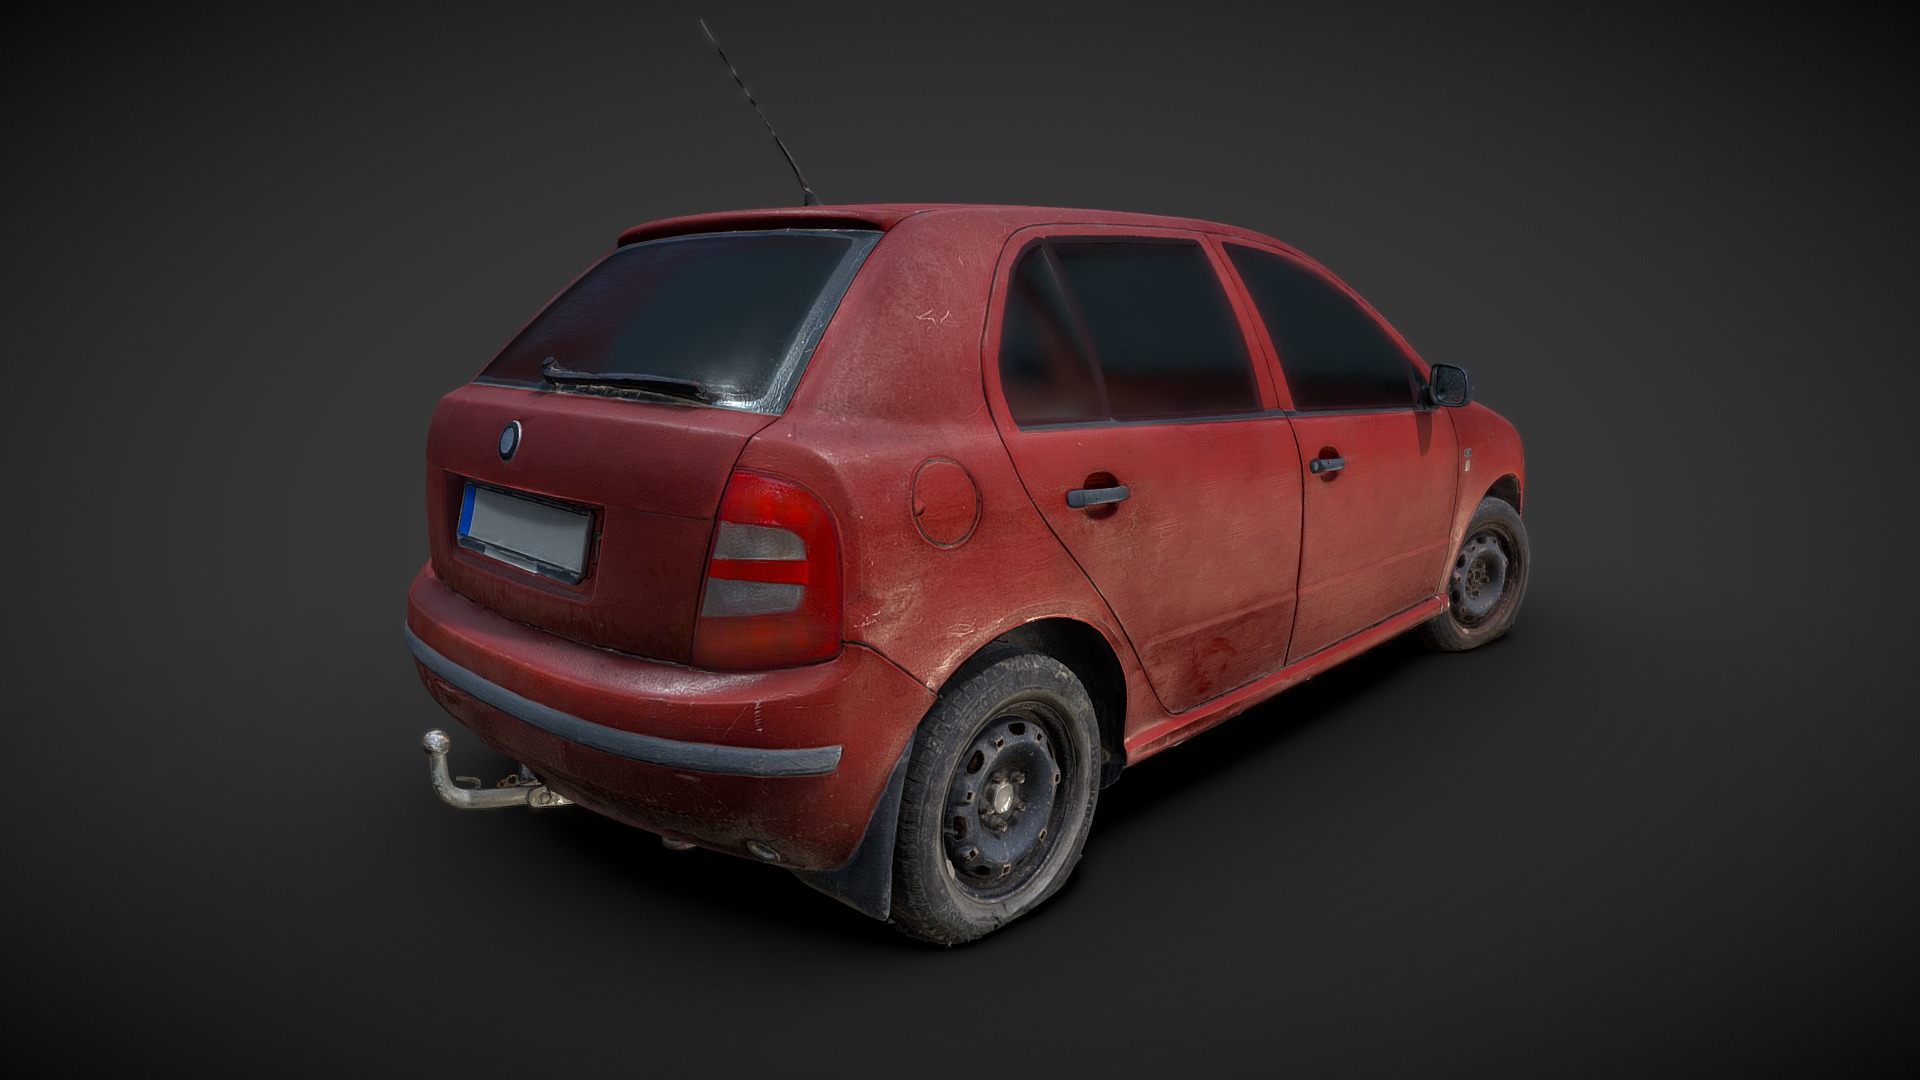 3D model Old Hatchback Car 3D Scan - This is a 3D model of the Old Hatchback Car 3D Scan. The 3D model is about a small red car.